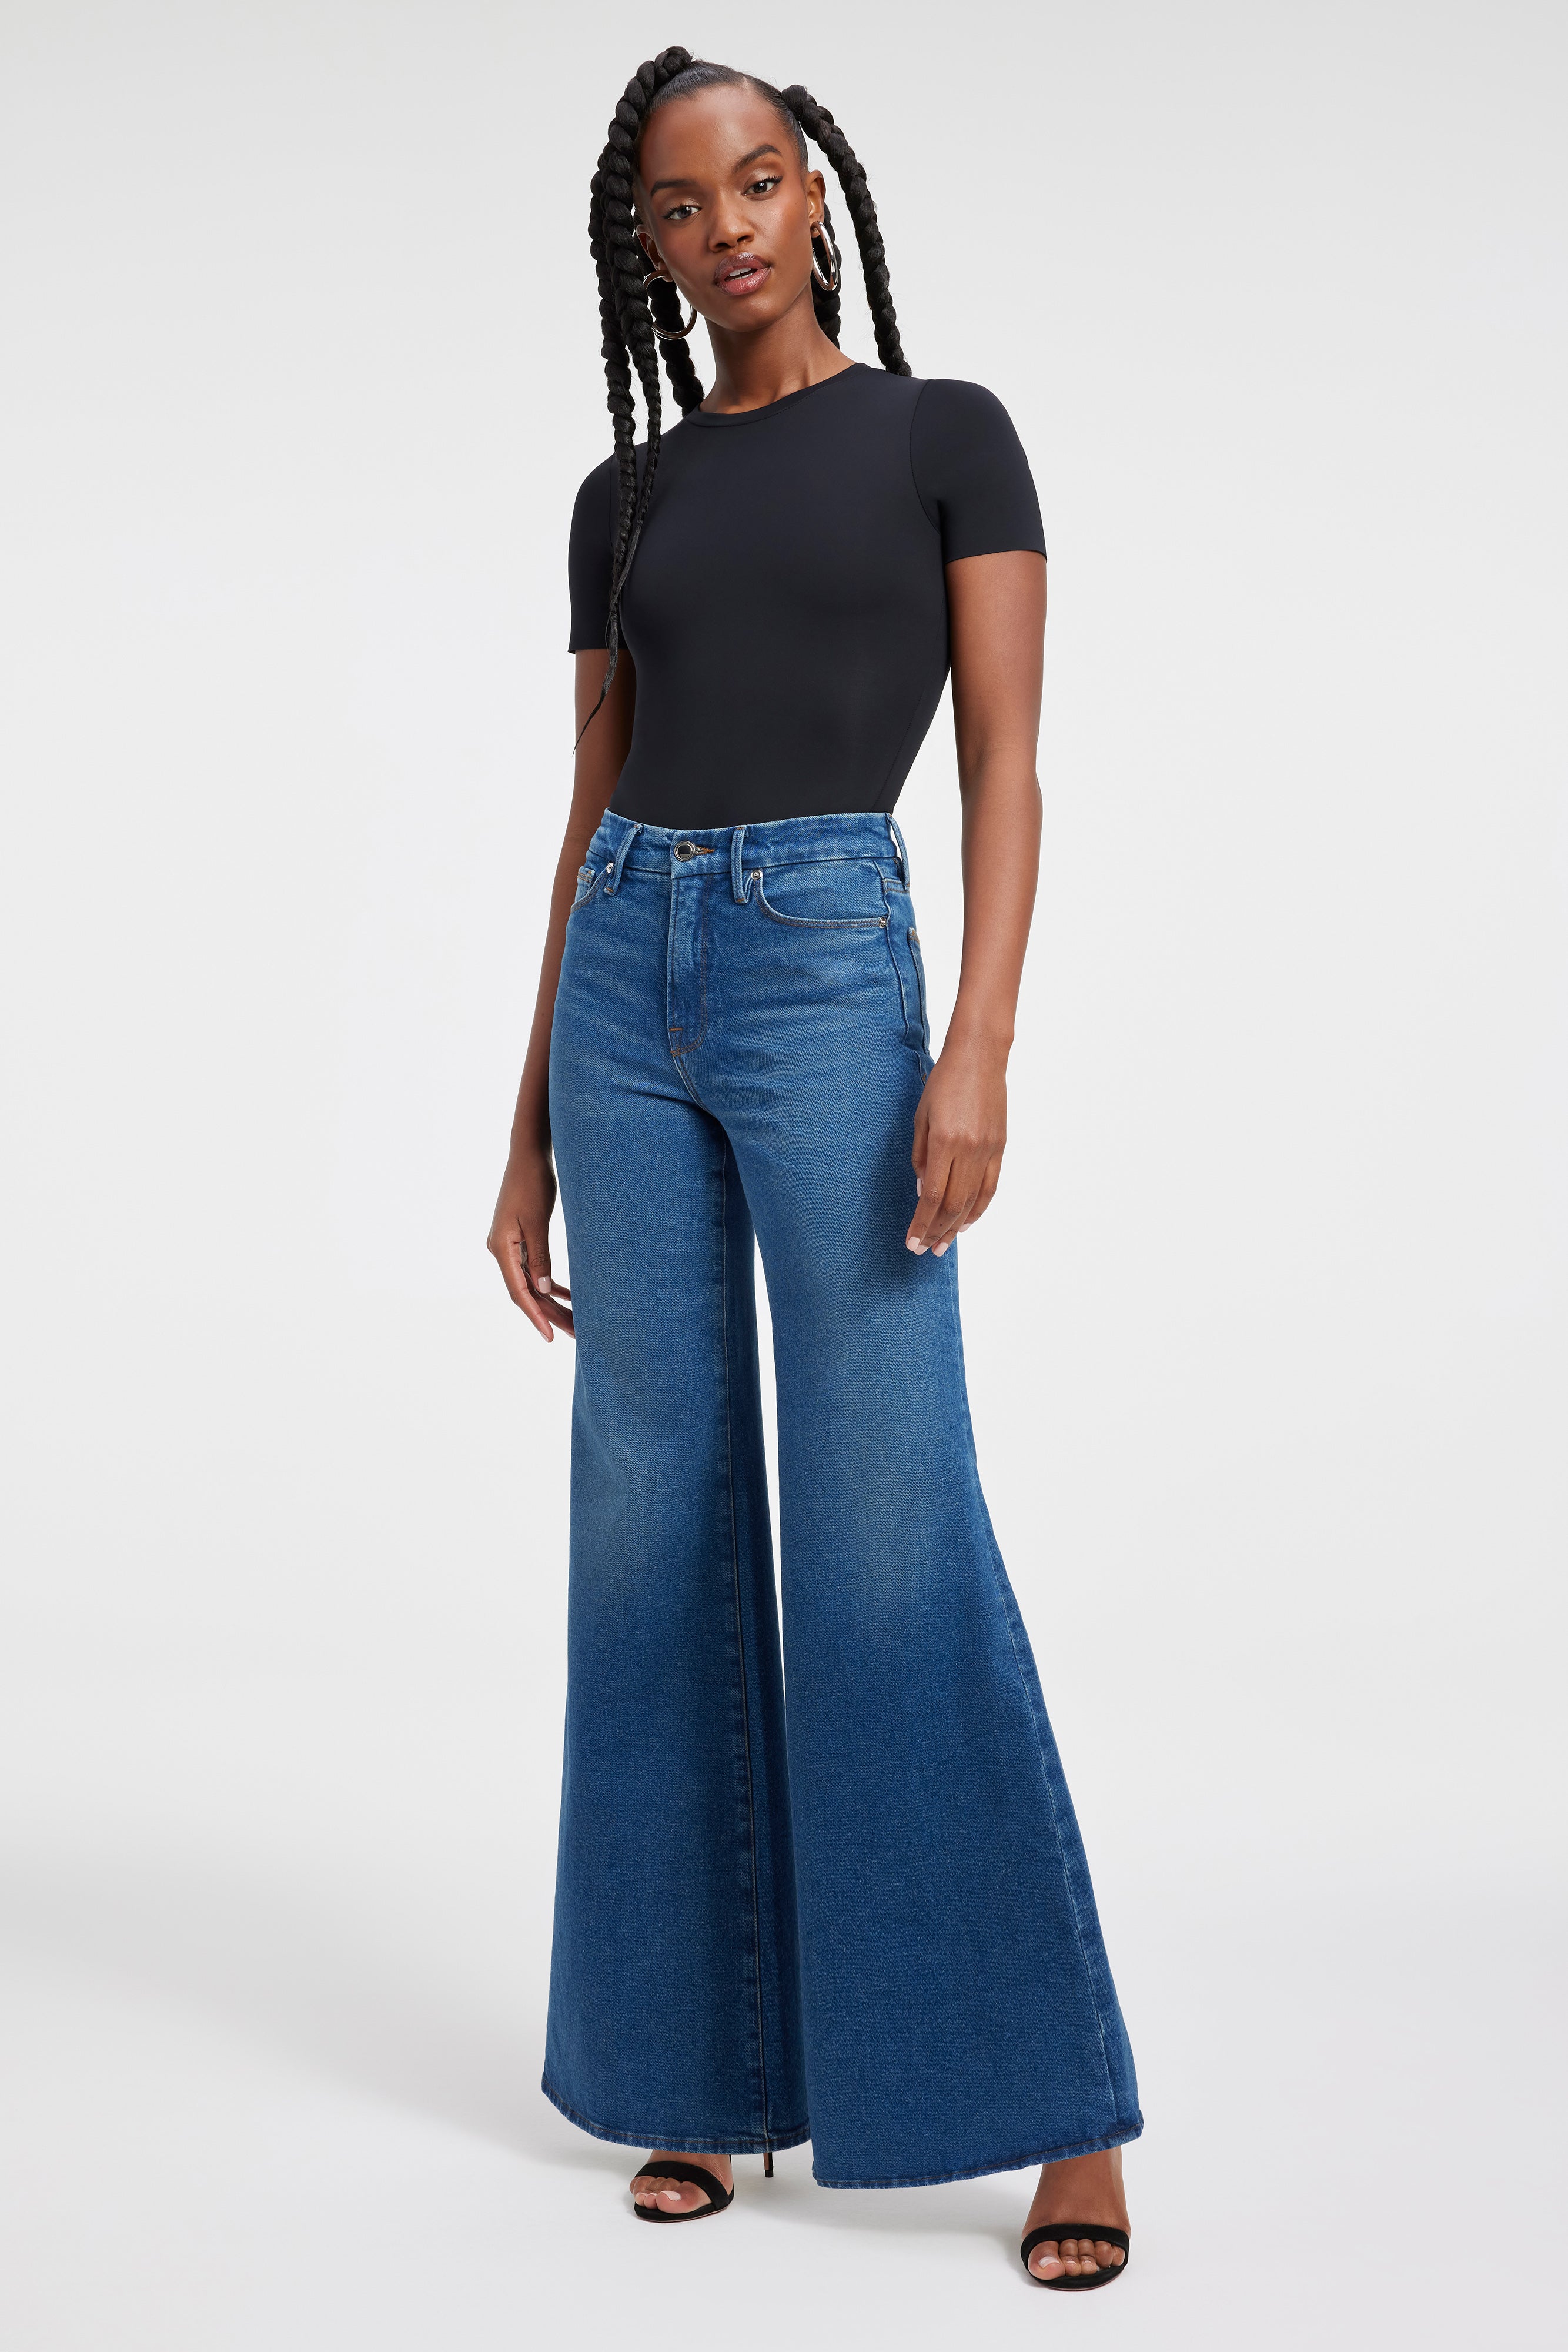 GOOD PALAZZO JEANS | BLUE451 - AMERICAN